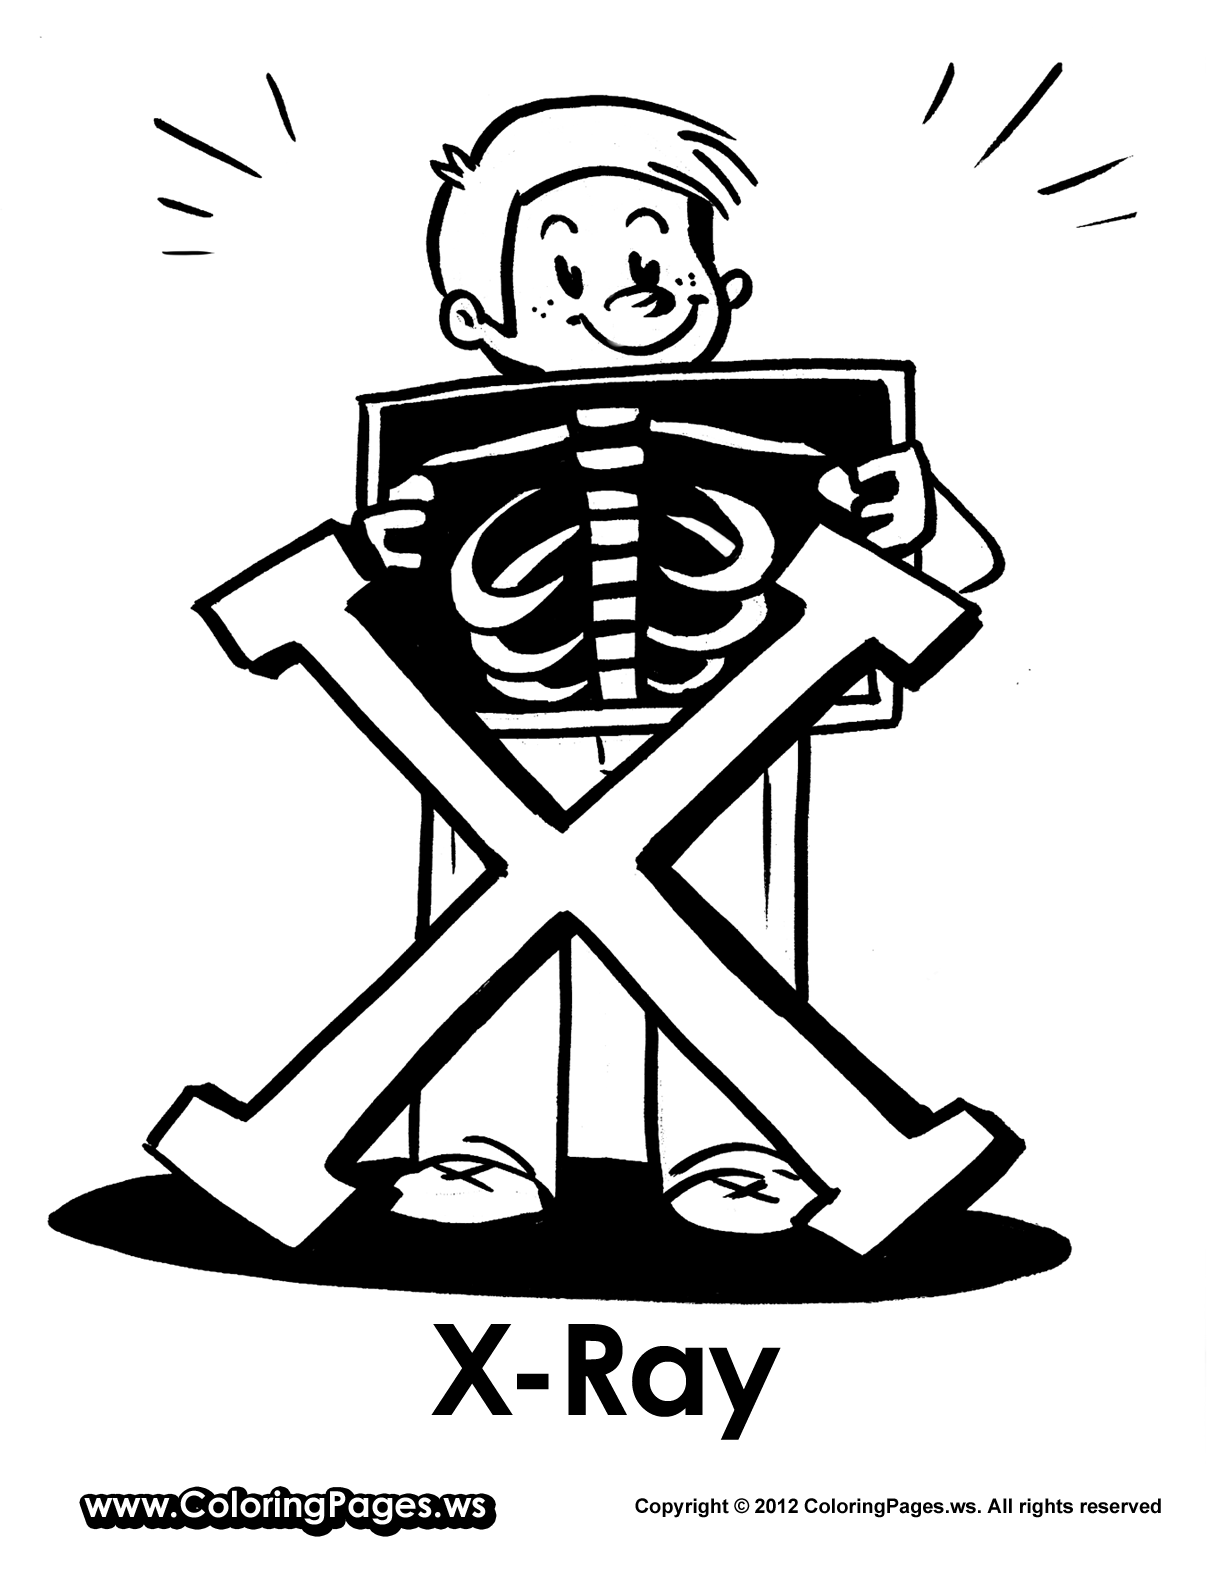 X is for X-ray - Coloring Pages | Coloring pages, Art display kids, Drawing  for kids